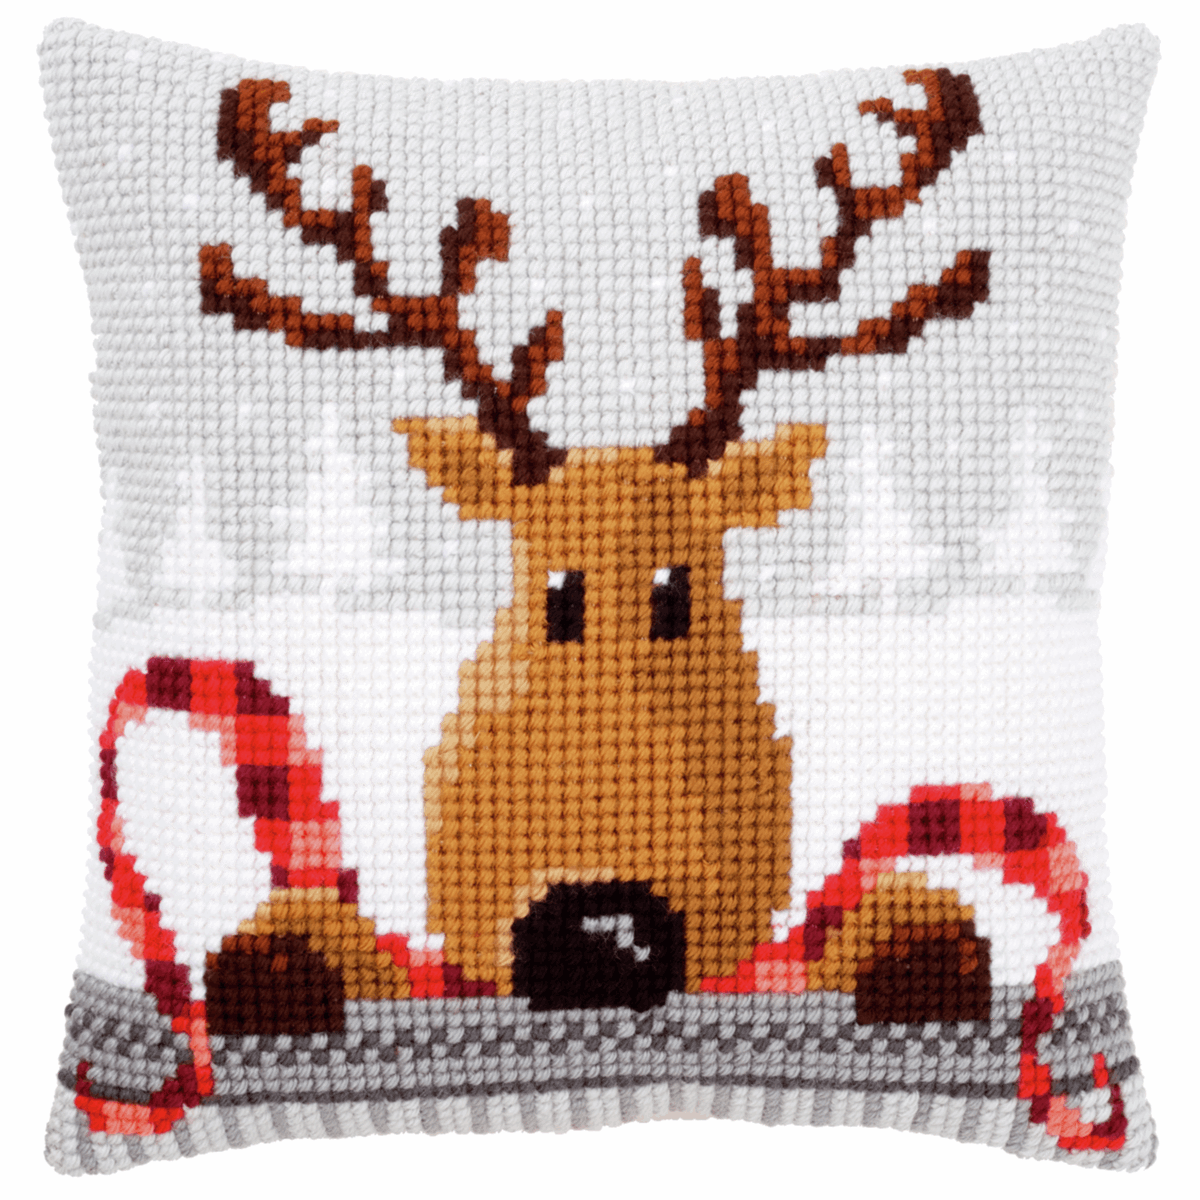 Cross Stitch Cushion Kit - Reindeer with a Red Scarf